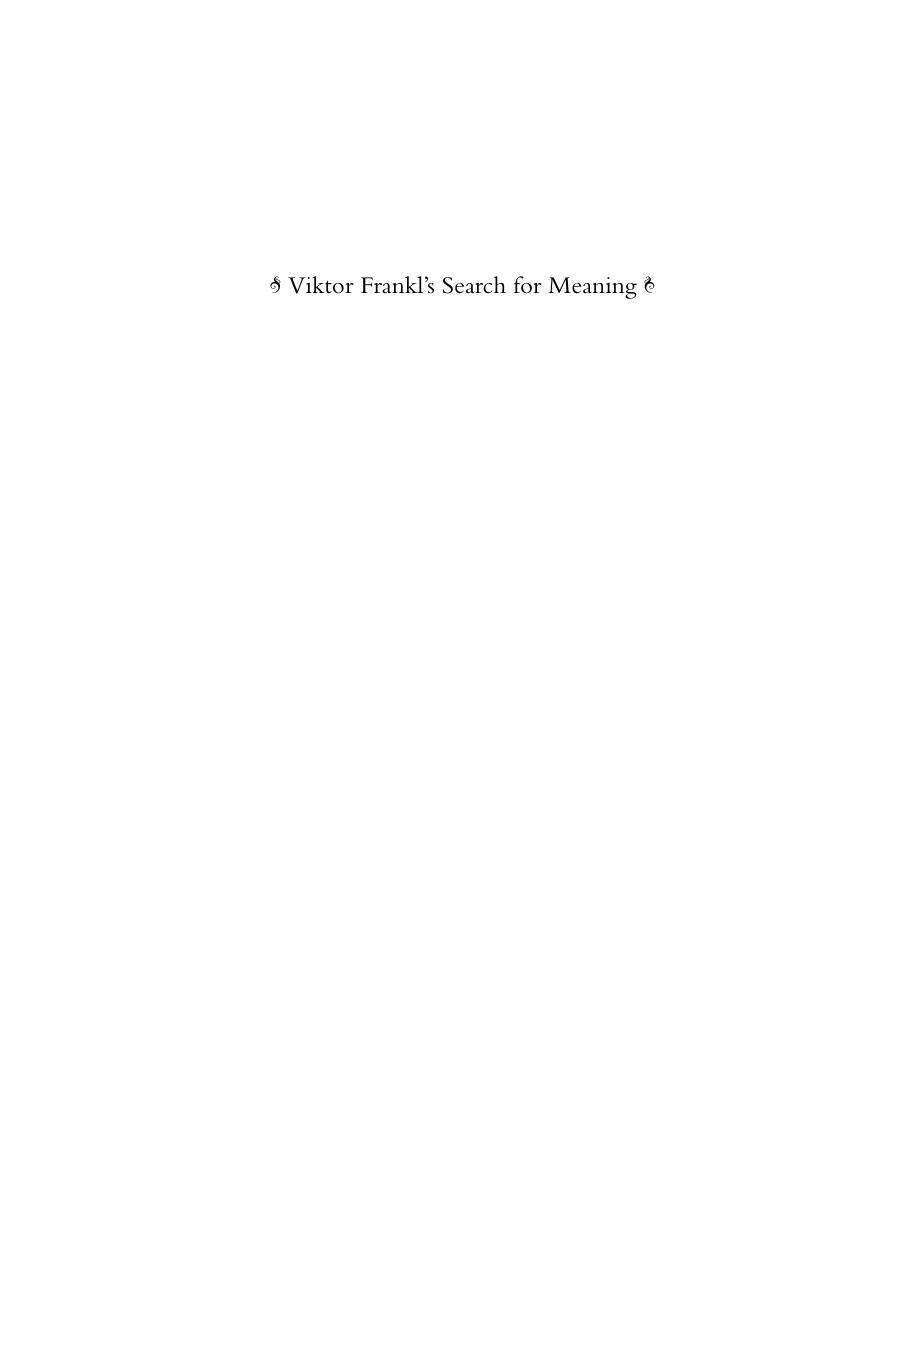 Viktor Frankl's Search for Meaning: An Emblematic 20th-Century Life by Timothy Pytell